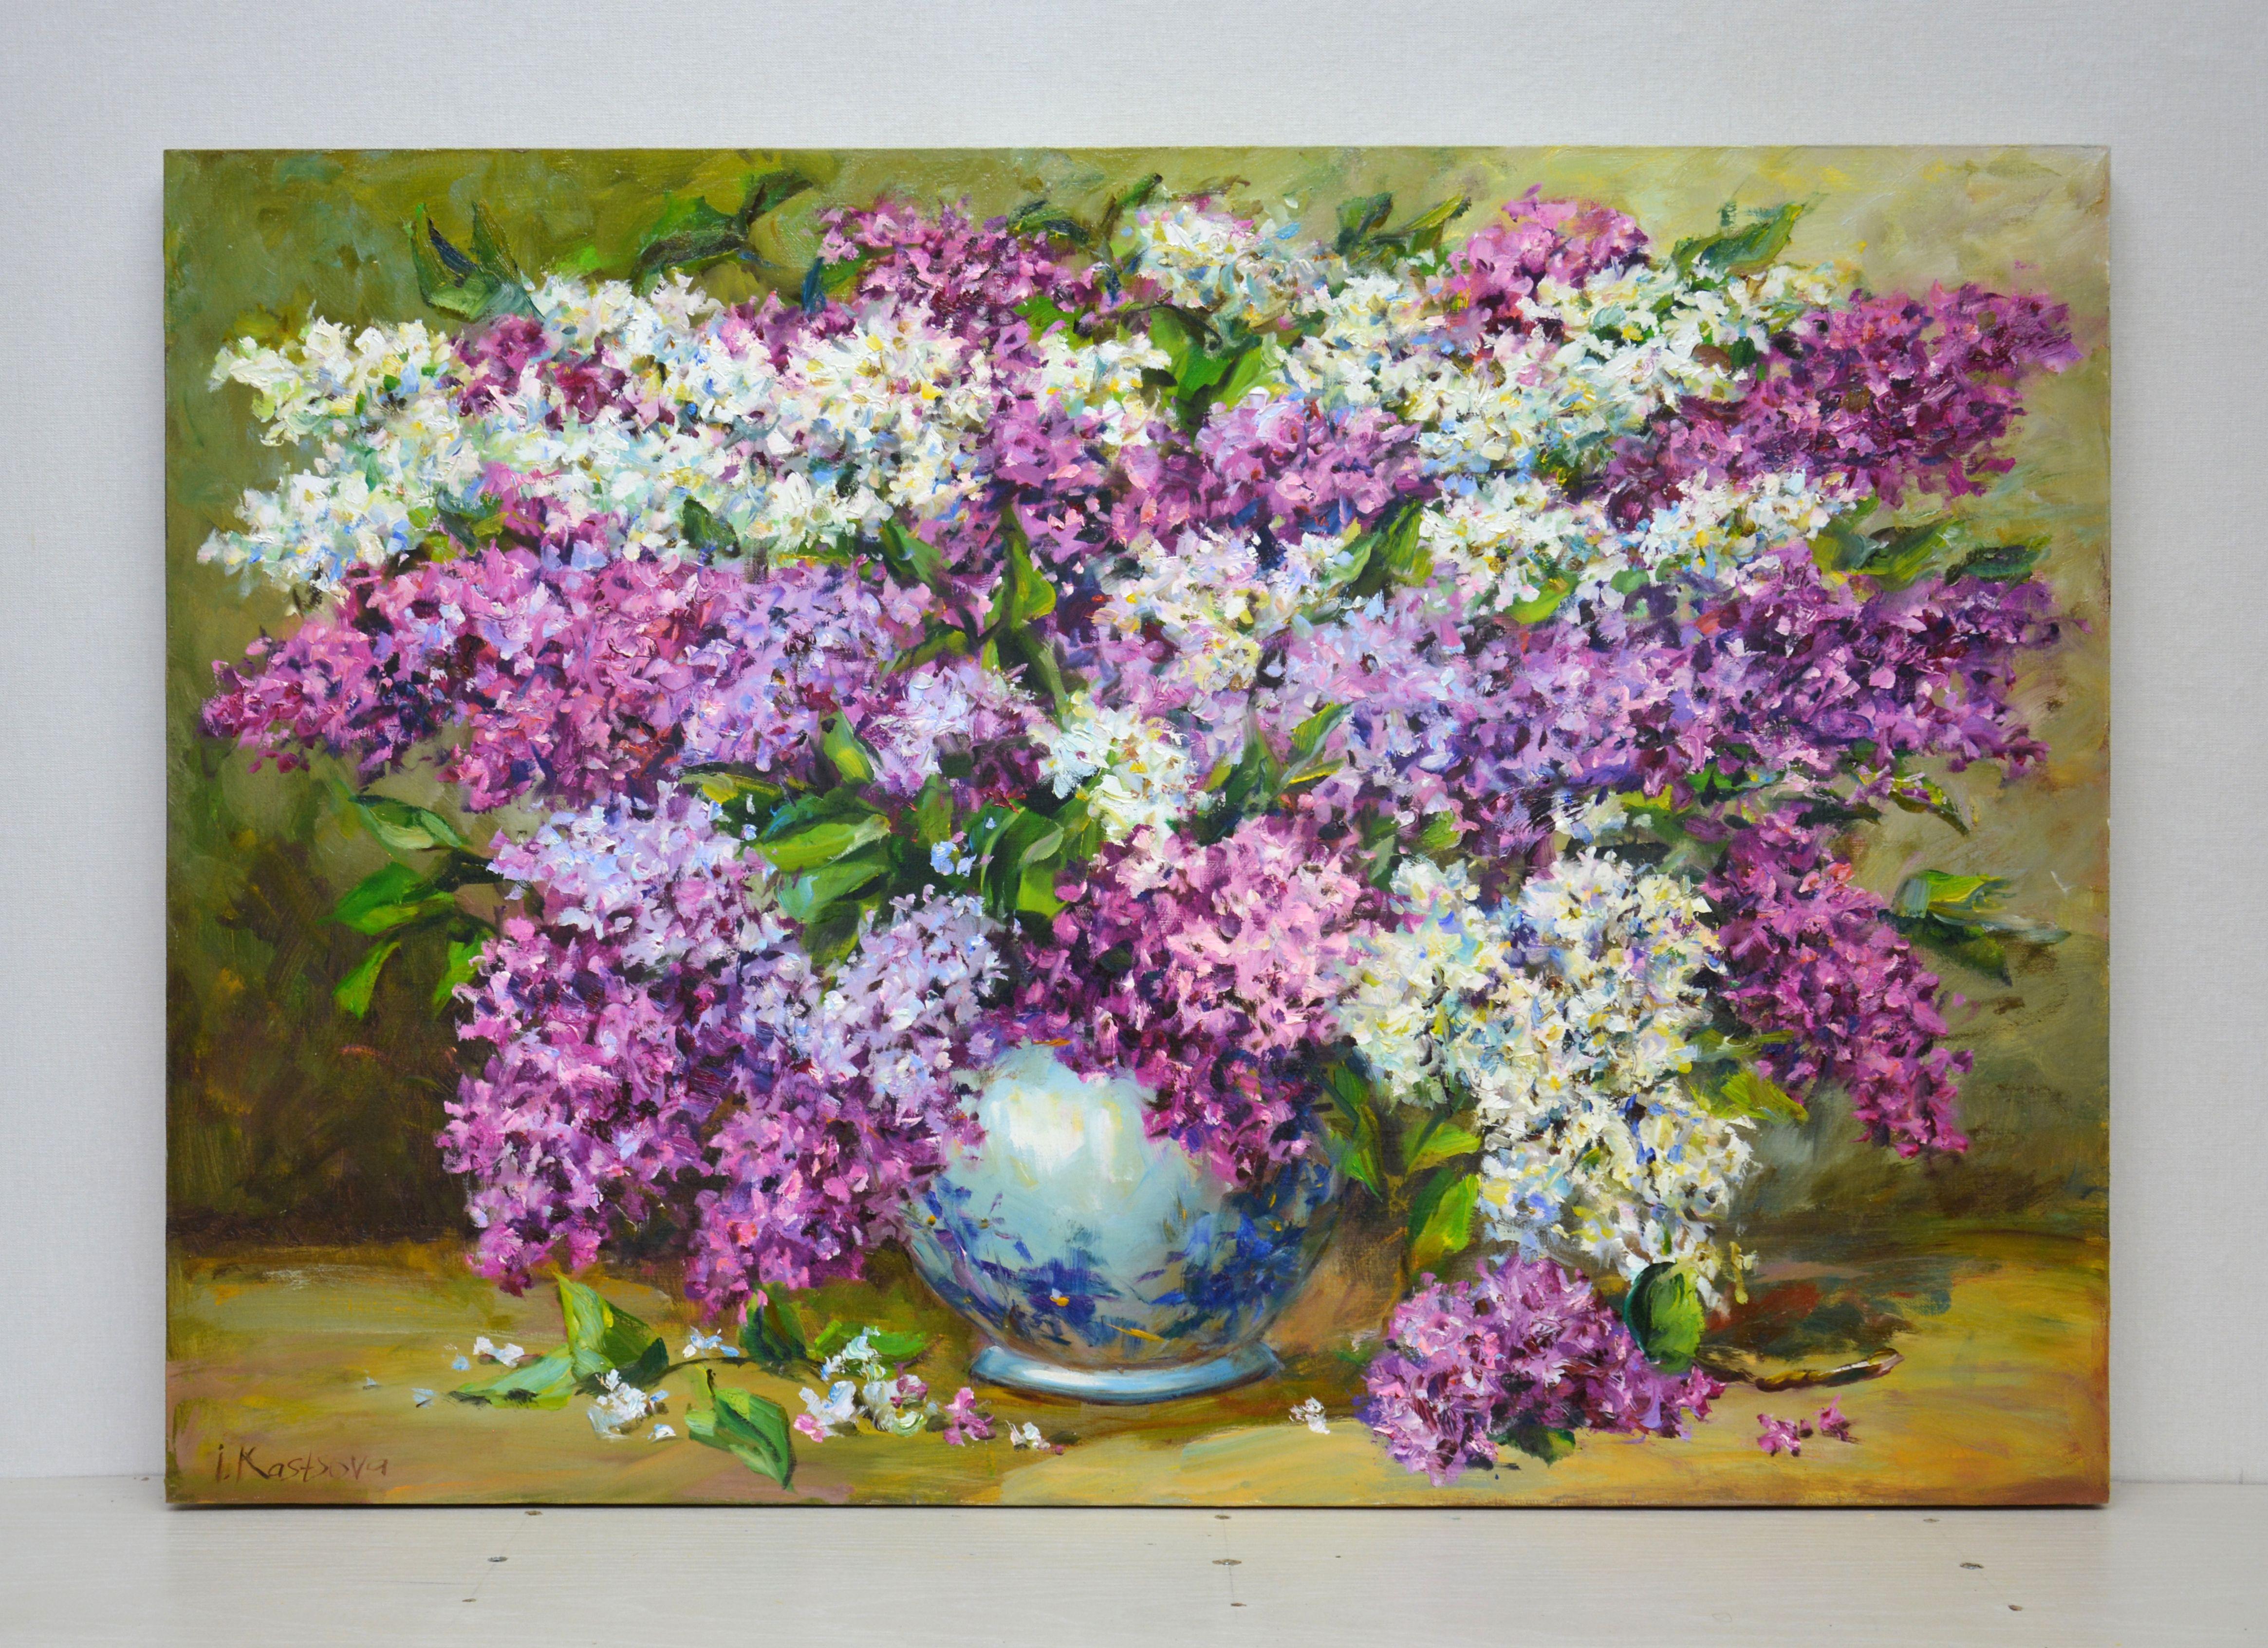 Luxurious bouquet of white and pink, purple lilac in a blue vase on a gray-greenish background.  Part of an ongoing series of floral still lifes. The picture has a good spatial quality, and bright colors cause children's happiness. In the style of